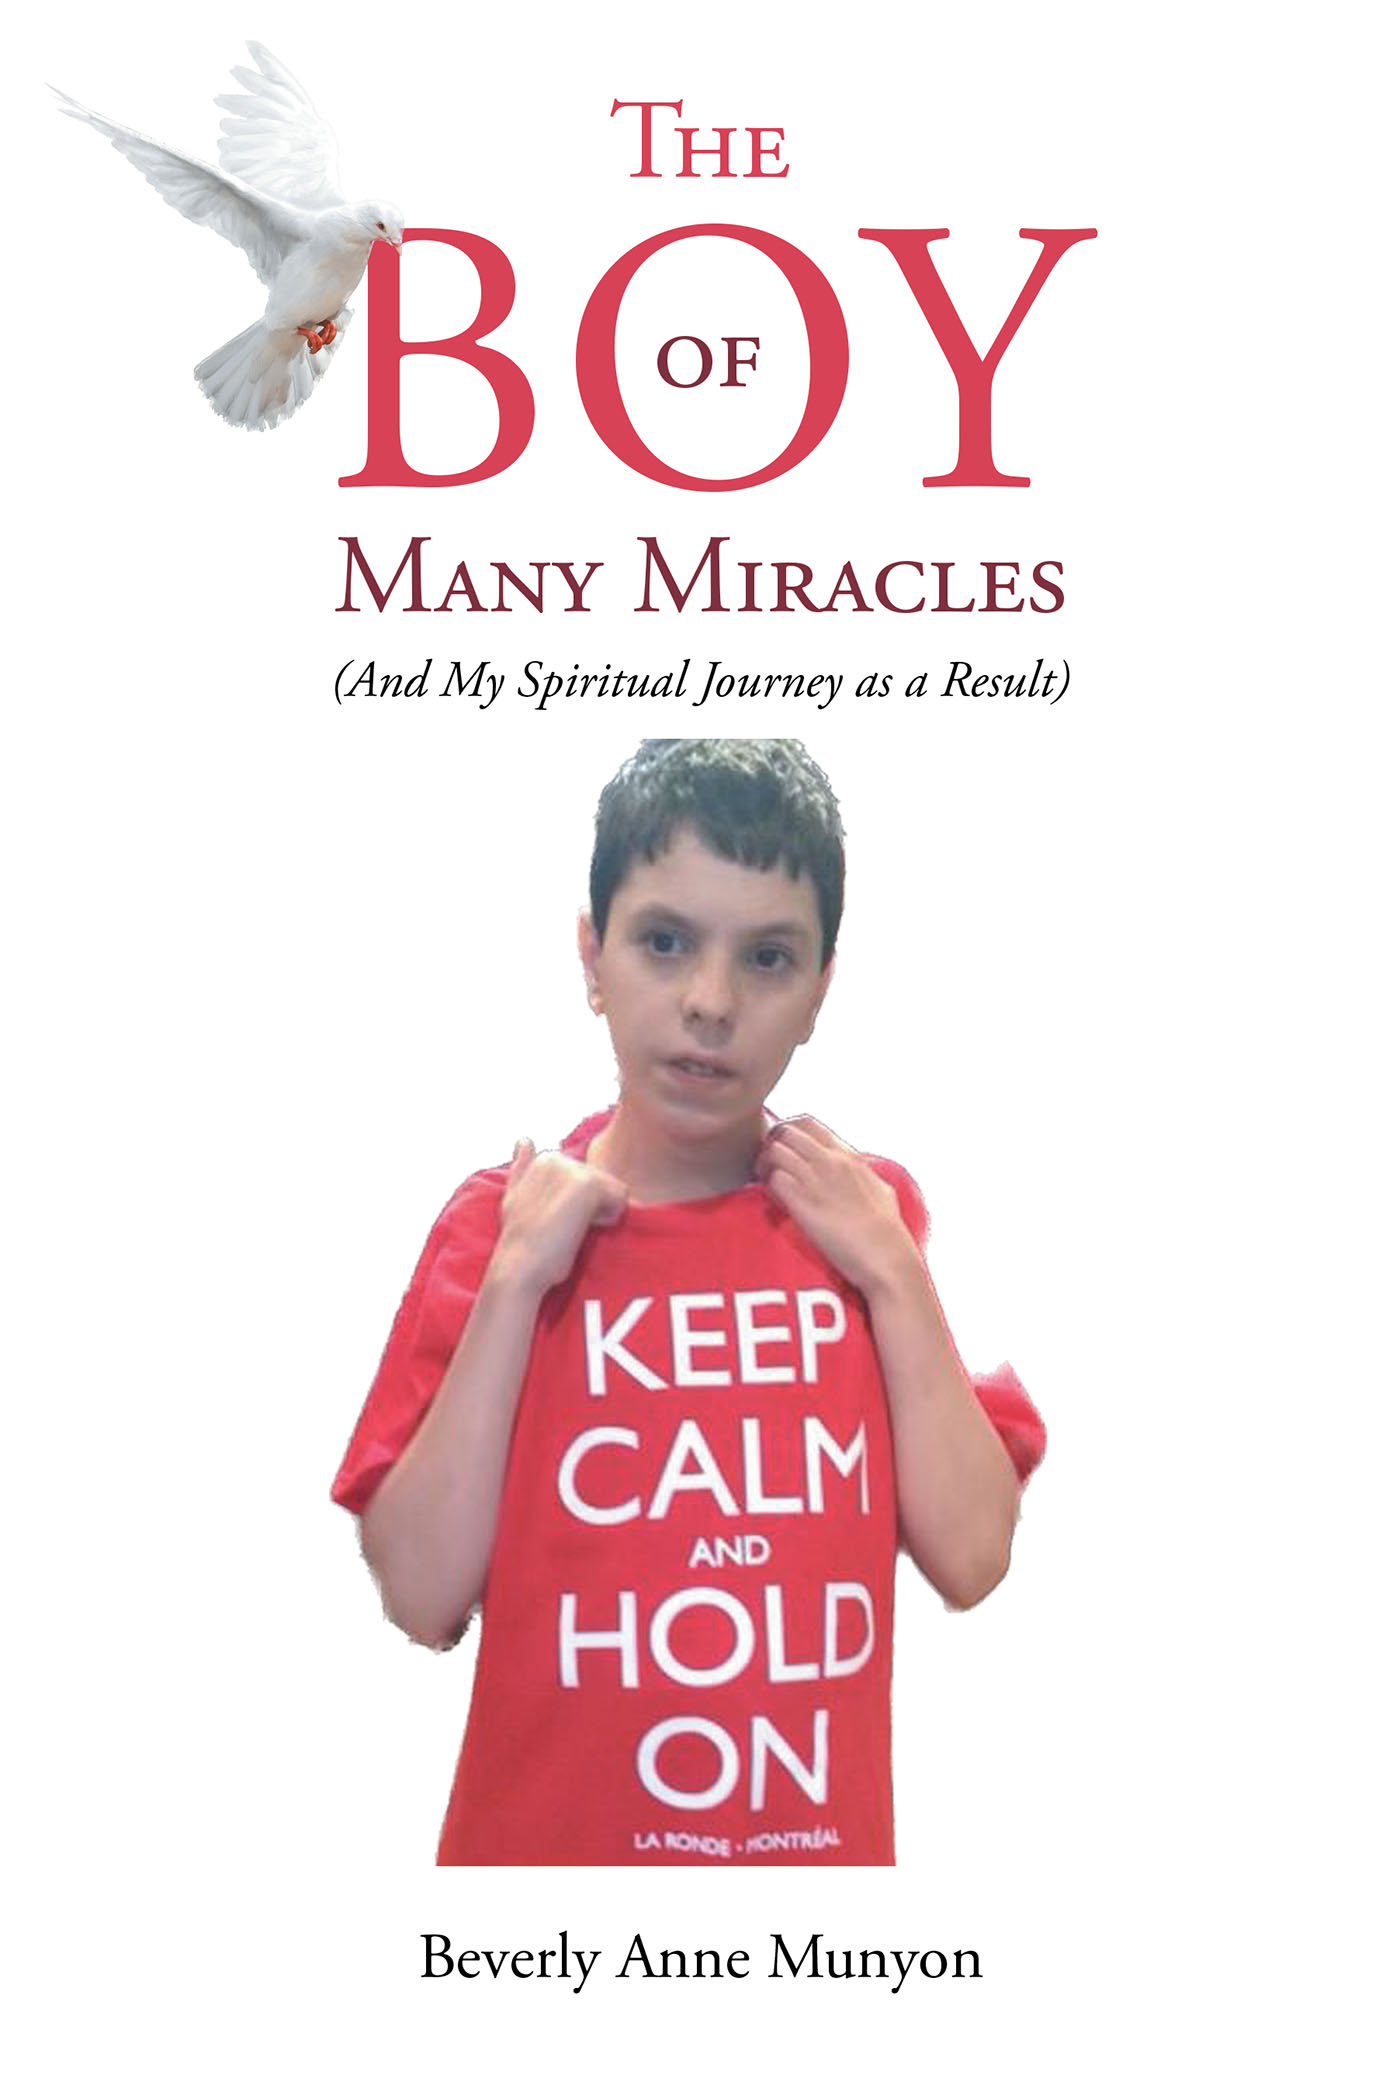 Author Beverly Anne Munyon’s New Book, "The Boy of Many Miracles (And My Spiritual Journey as a Result)," is a Remarkable True Story of God’s Love